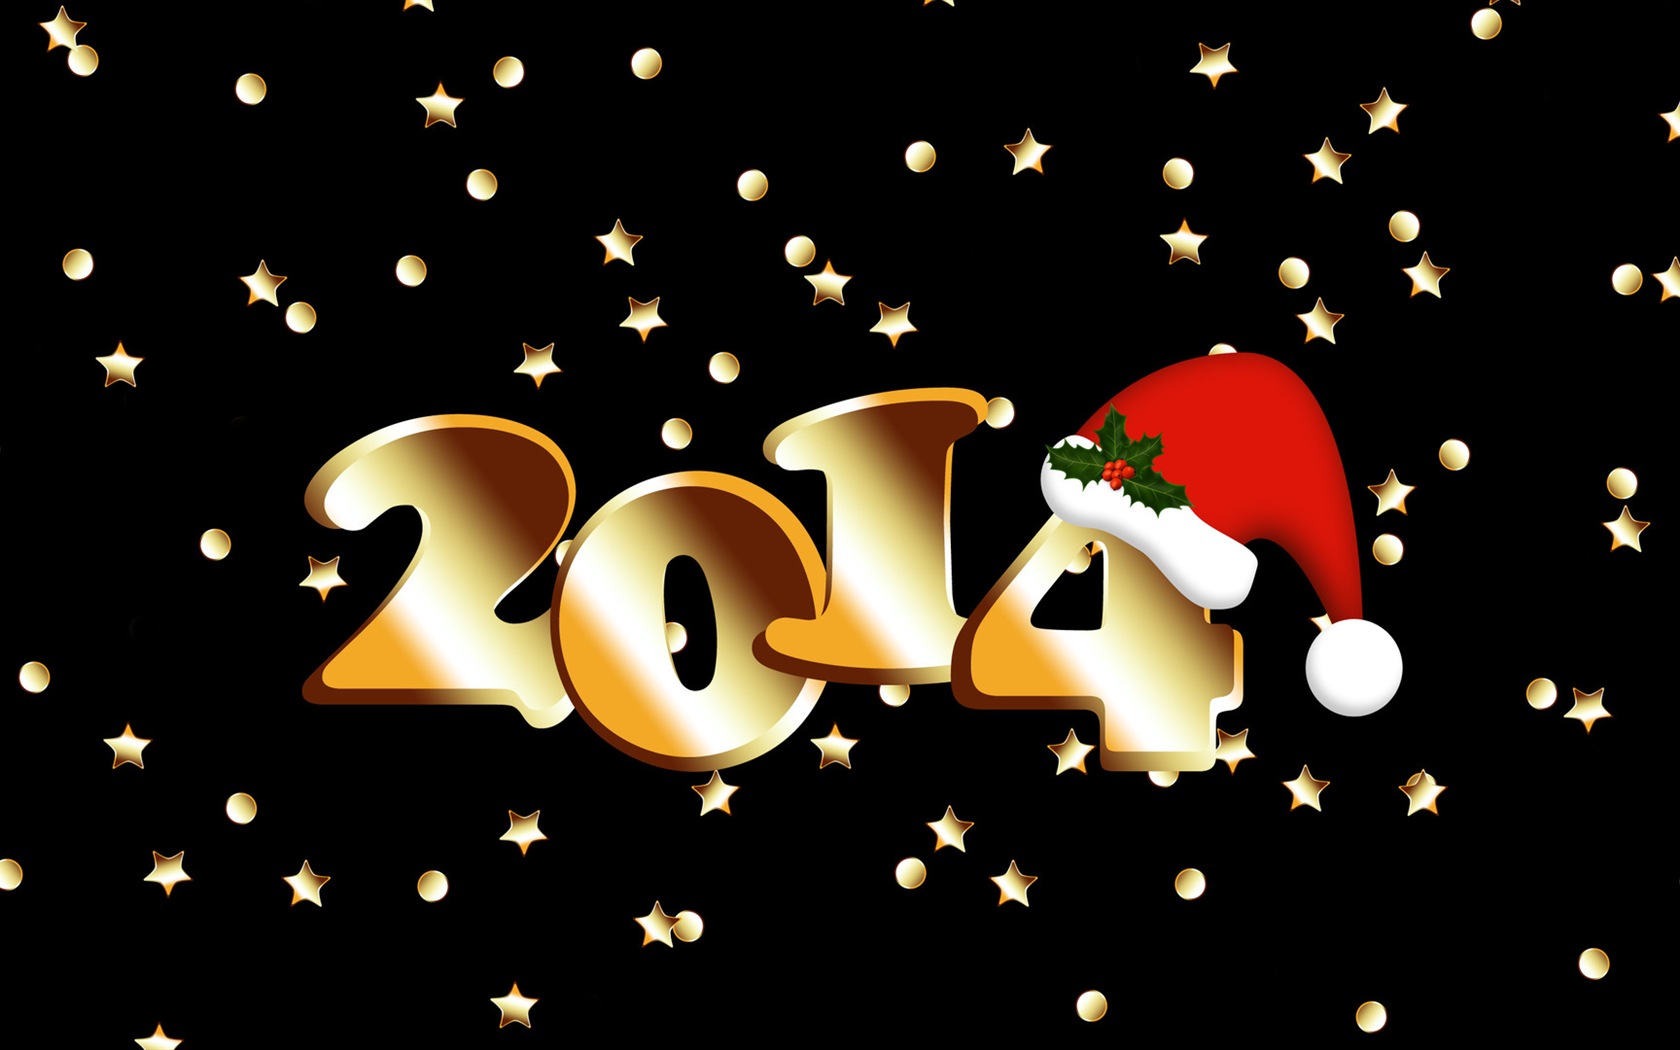 2014 New Year Theme HD Wallpapers (1) #15 - 1680x1050